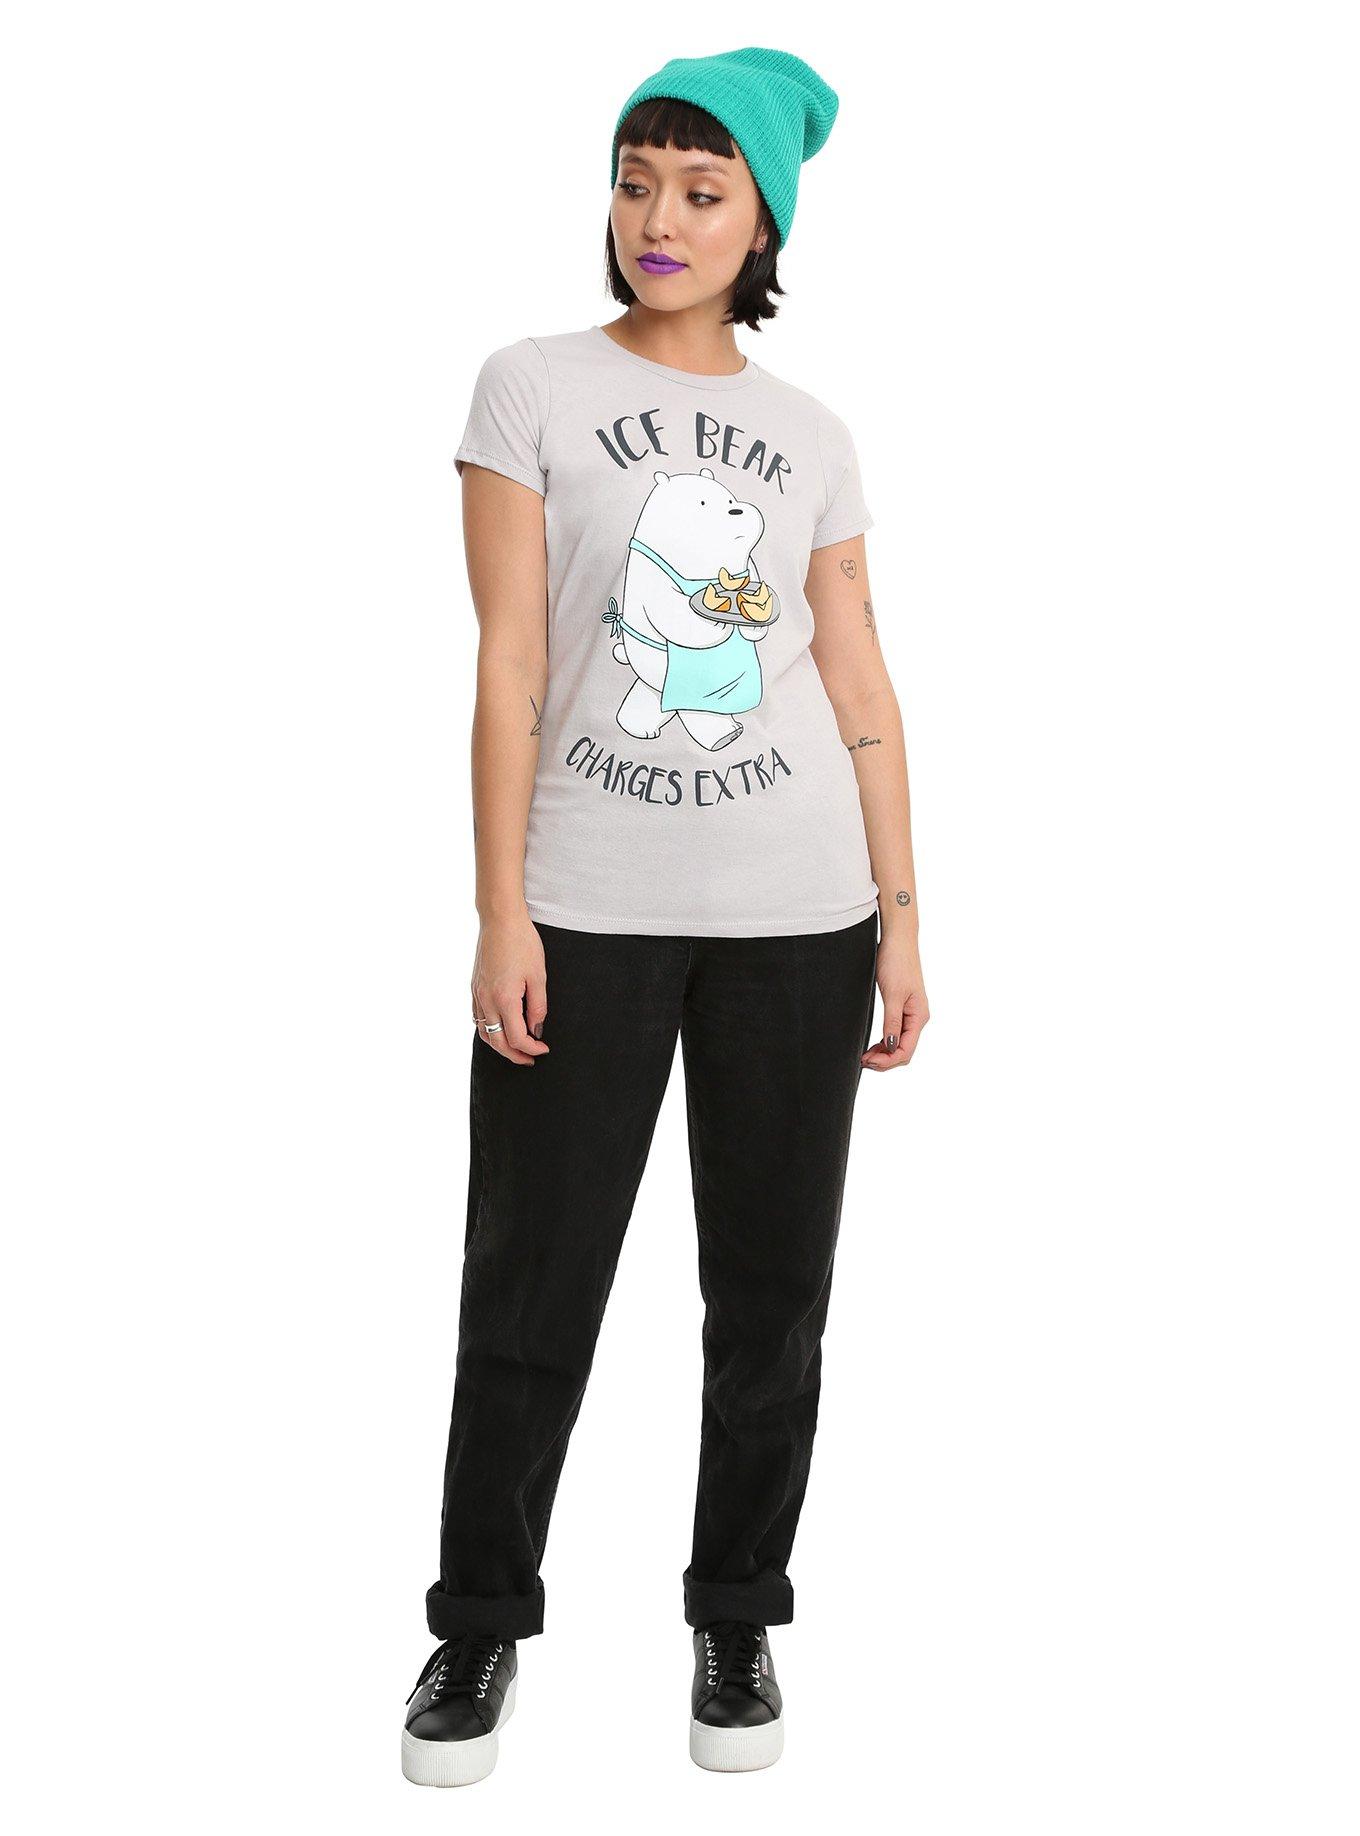 We Bare Bears Ice Bear Charges Extra Girls T-Shirt, , alternate